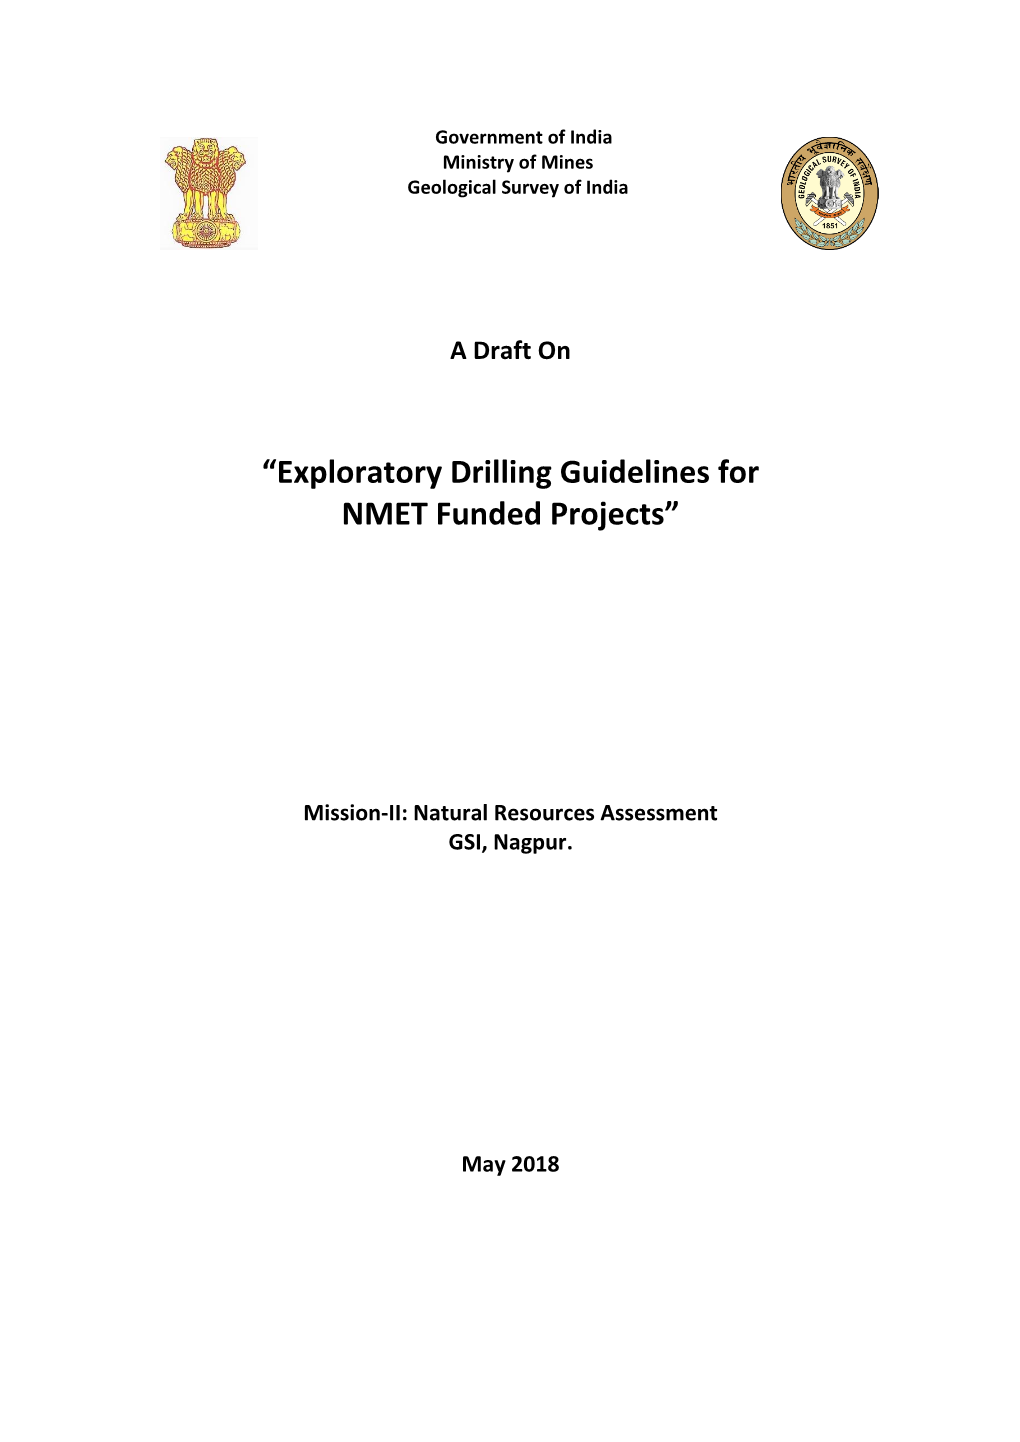 “Exploratory Drilling Guidelines for NMET Funded Projects”